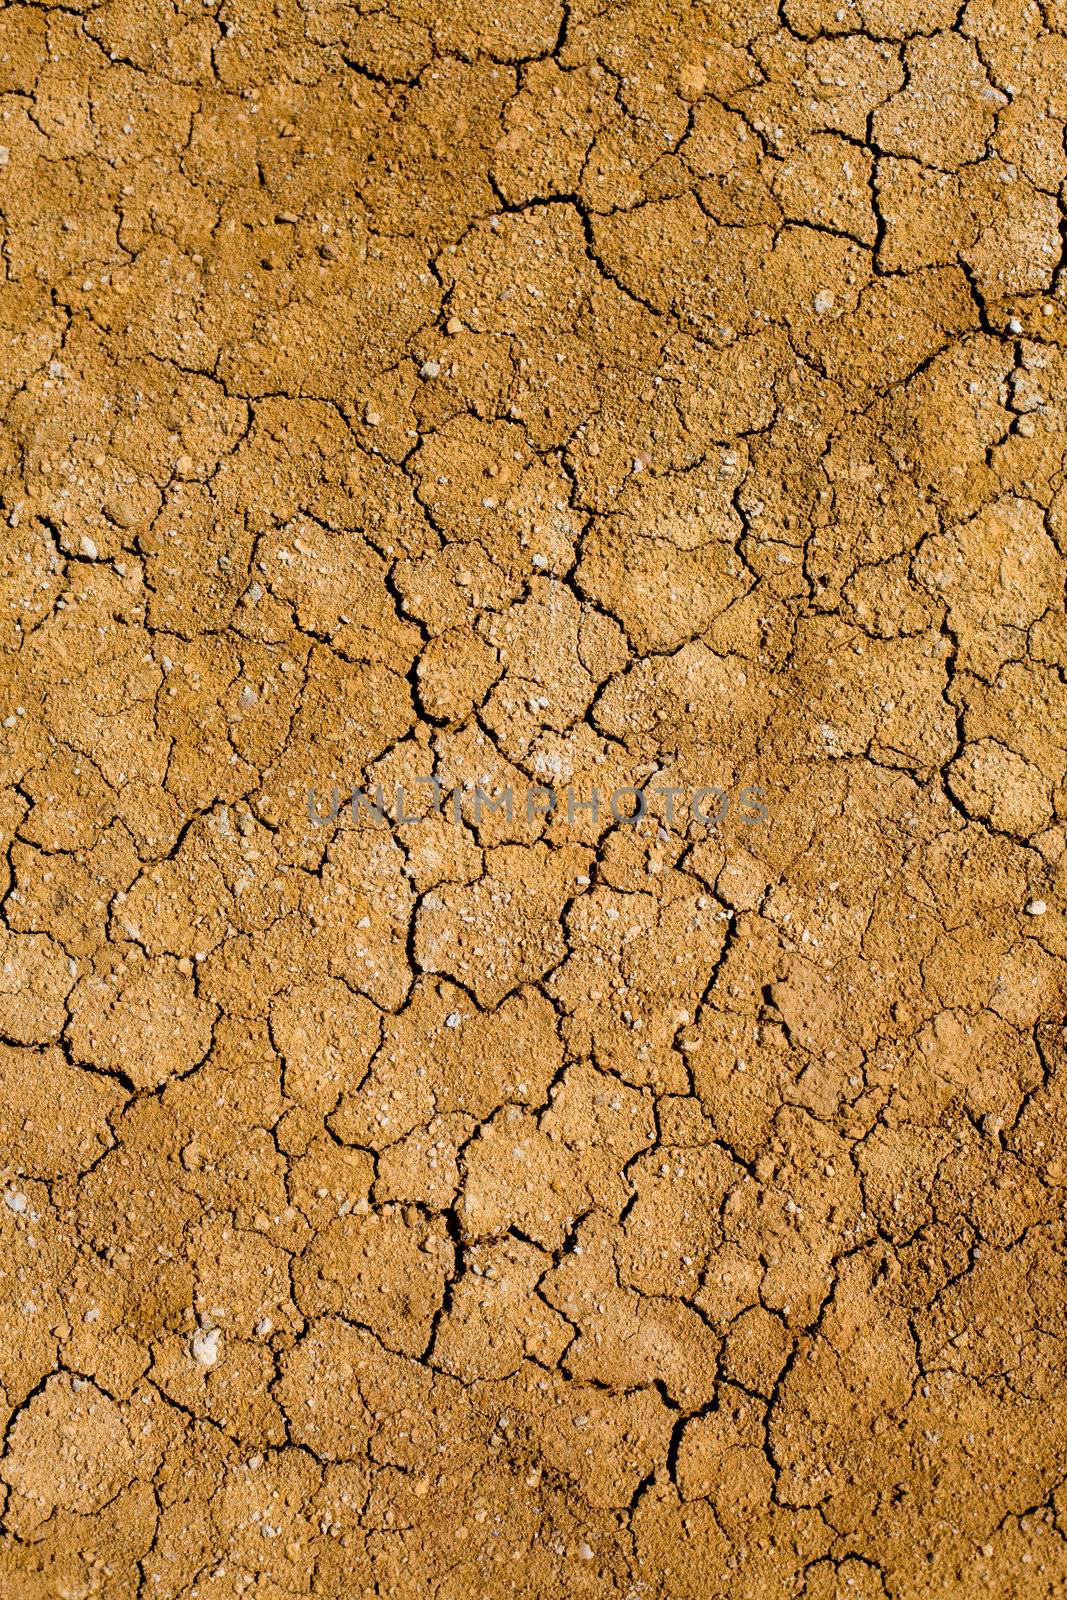 
Crackles in the ground on a dehydrated soil